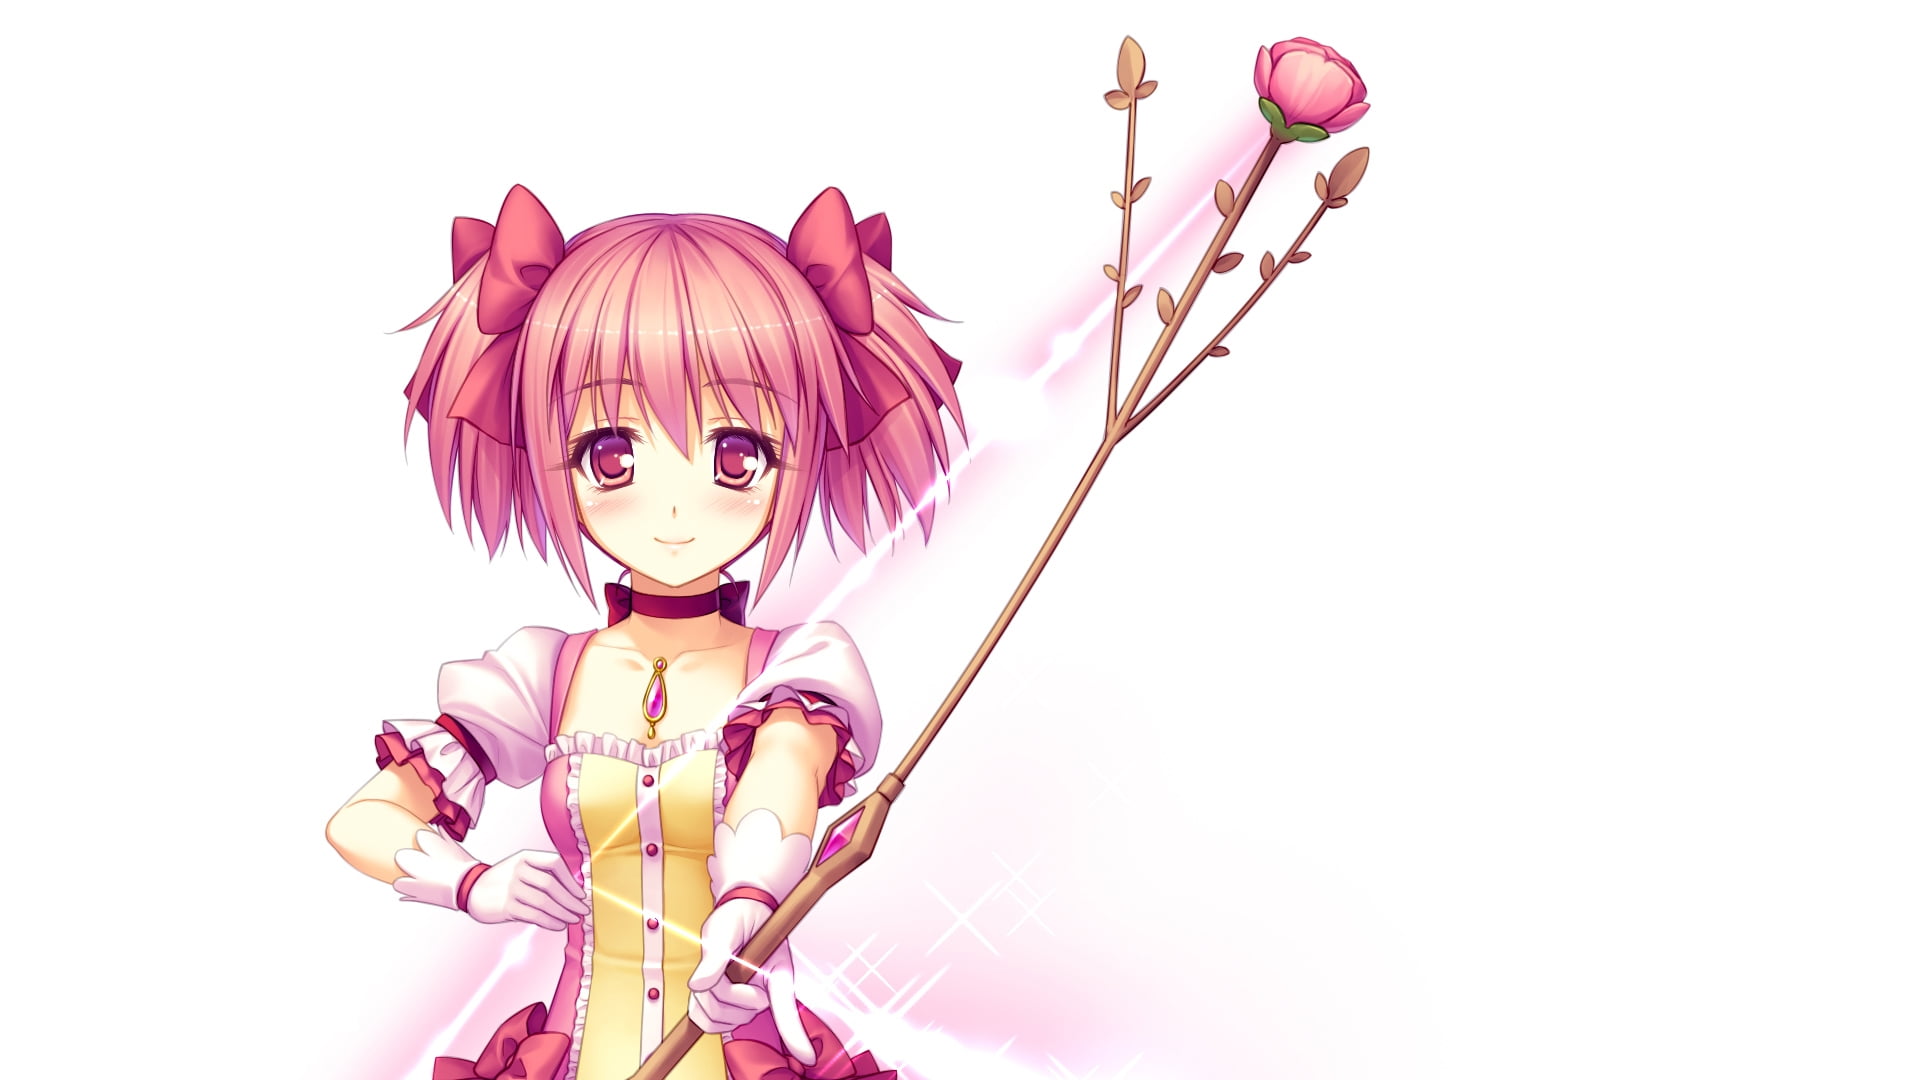 Pink Haired Female Anime Character Illustration Hd Wallpaper Wallpaper Flare